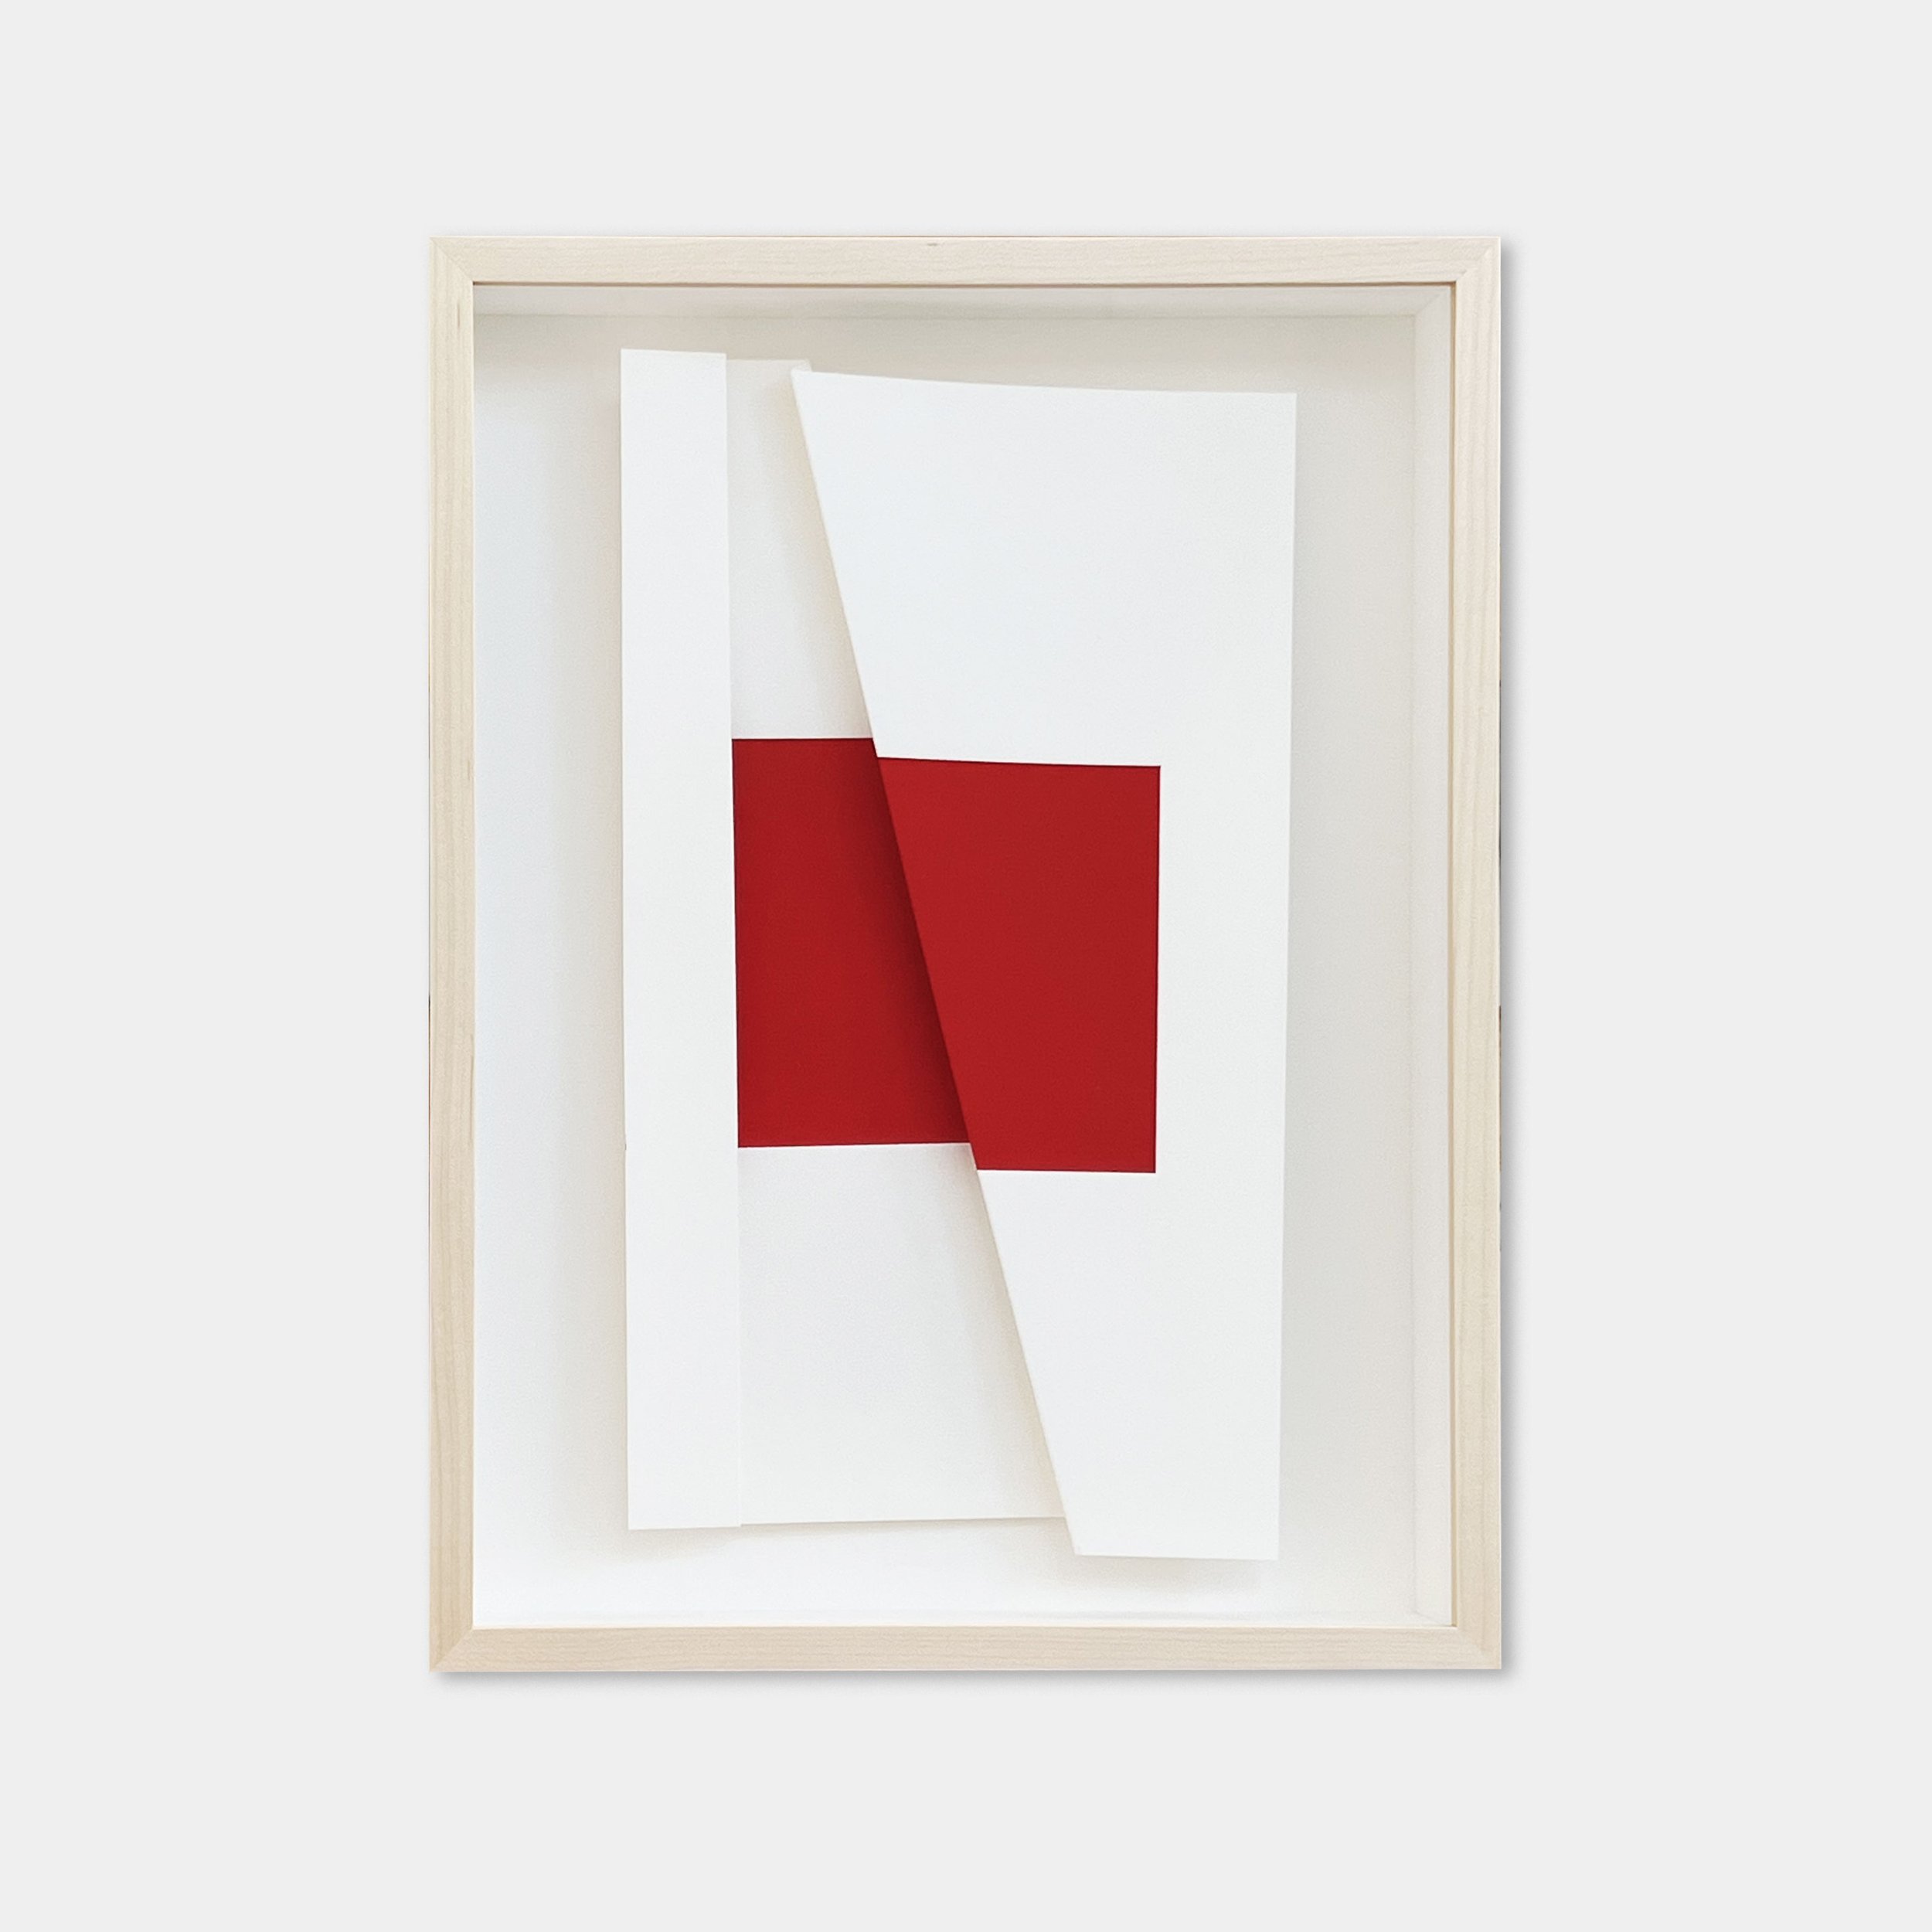  Vanha Lam    Untitled , 2022 (VL002) Gouache on archival paper in maple frame 16.75" x 12.75" x 2.5” 